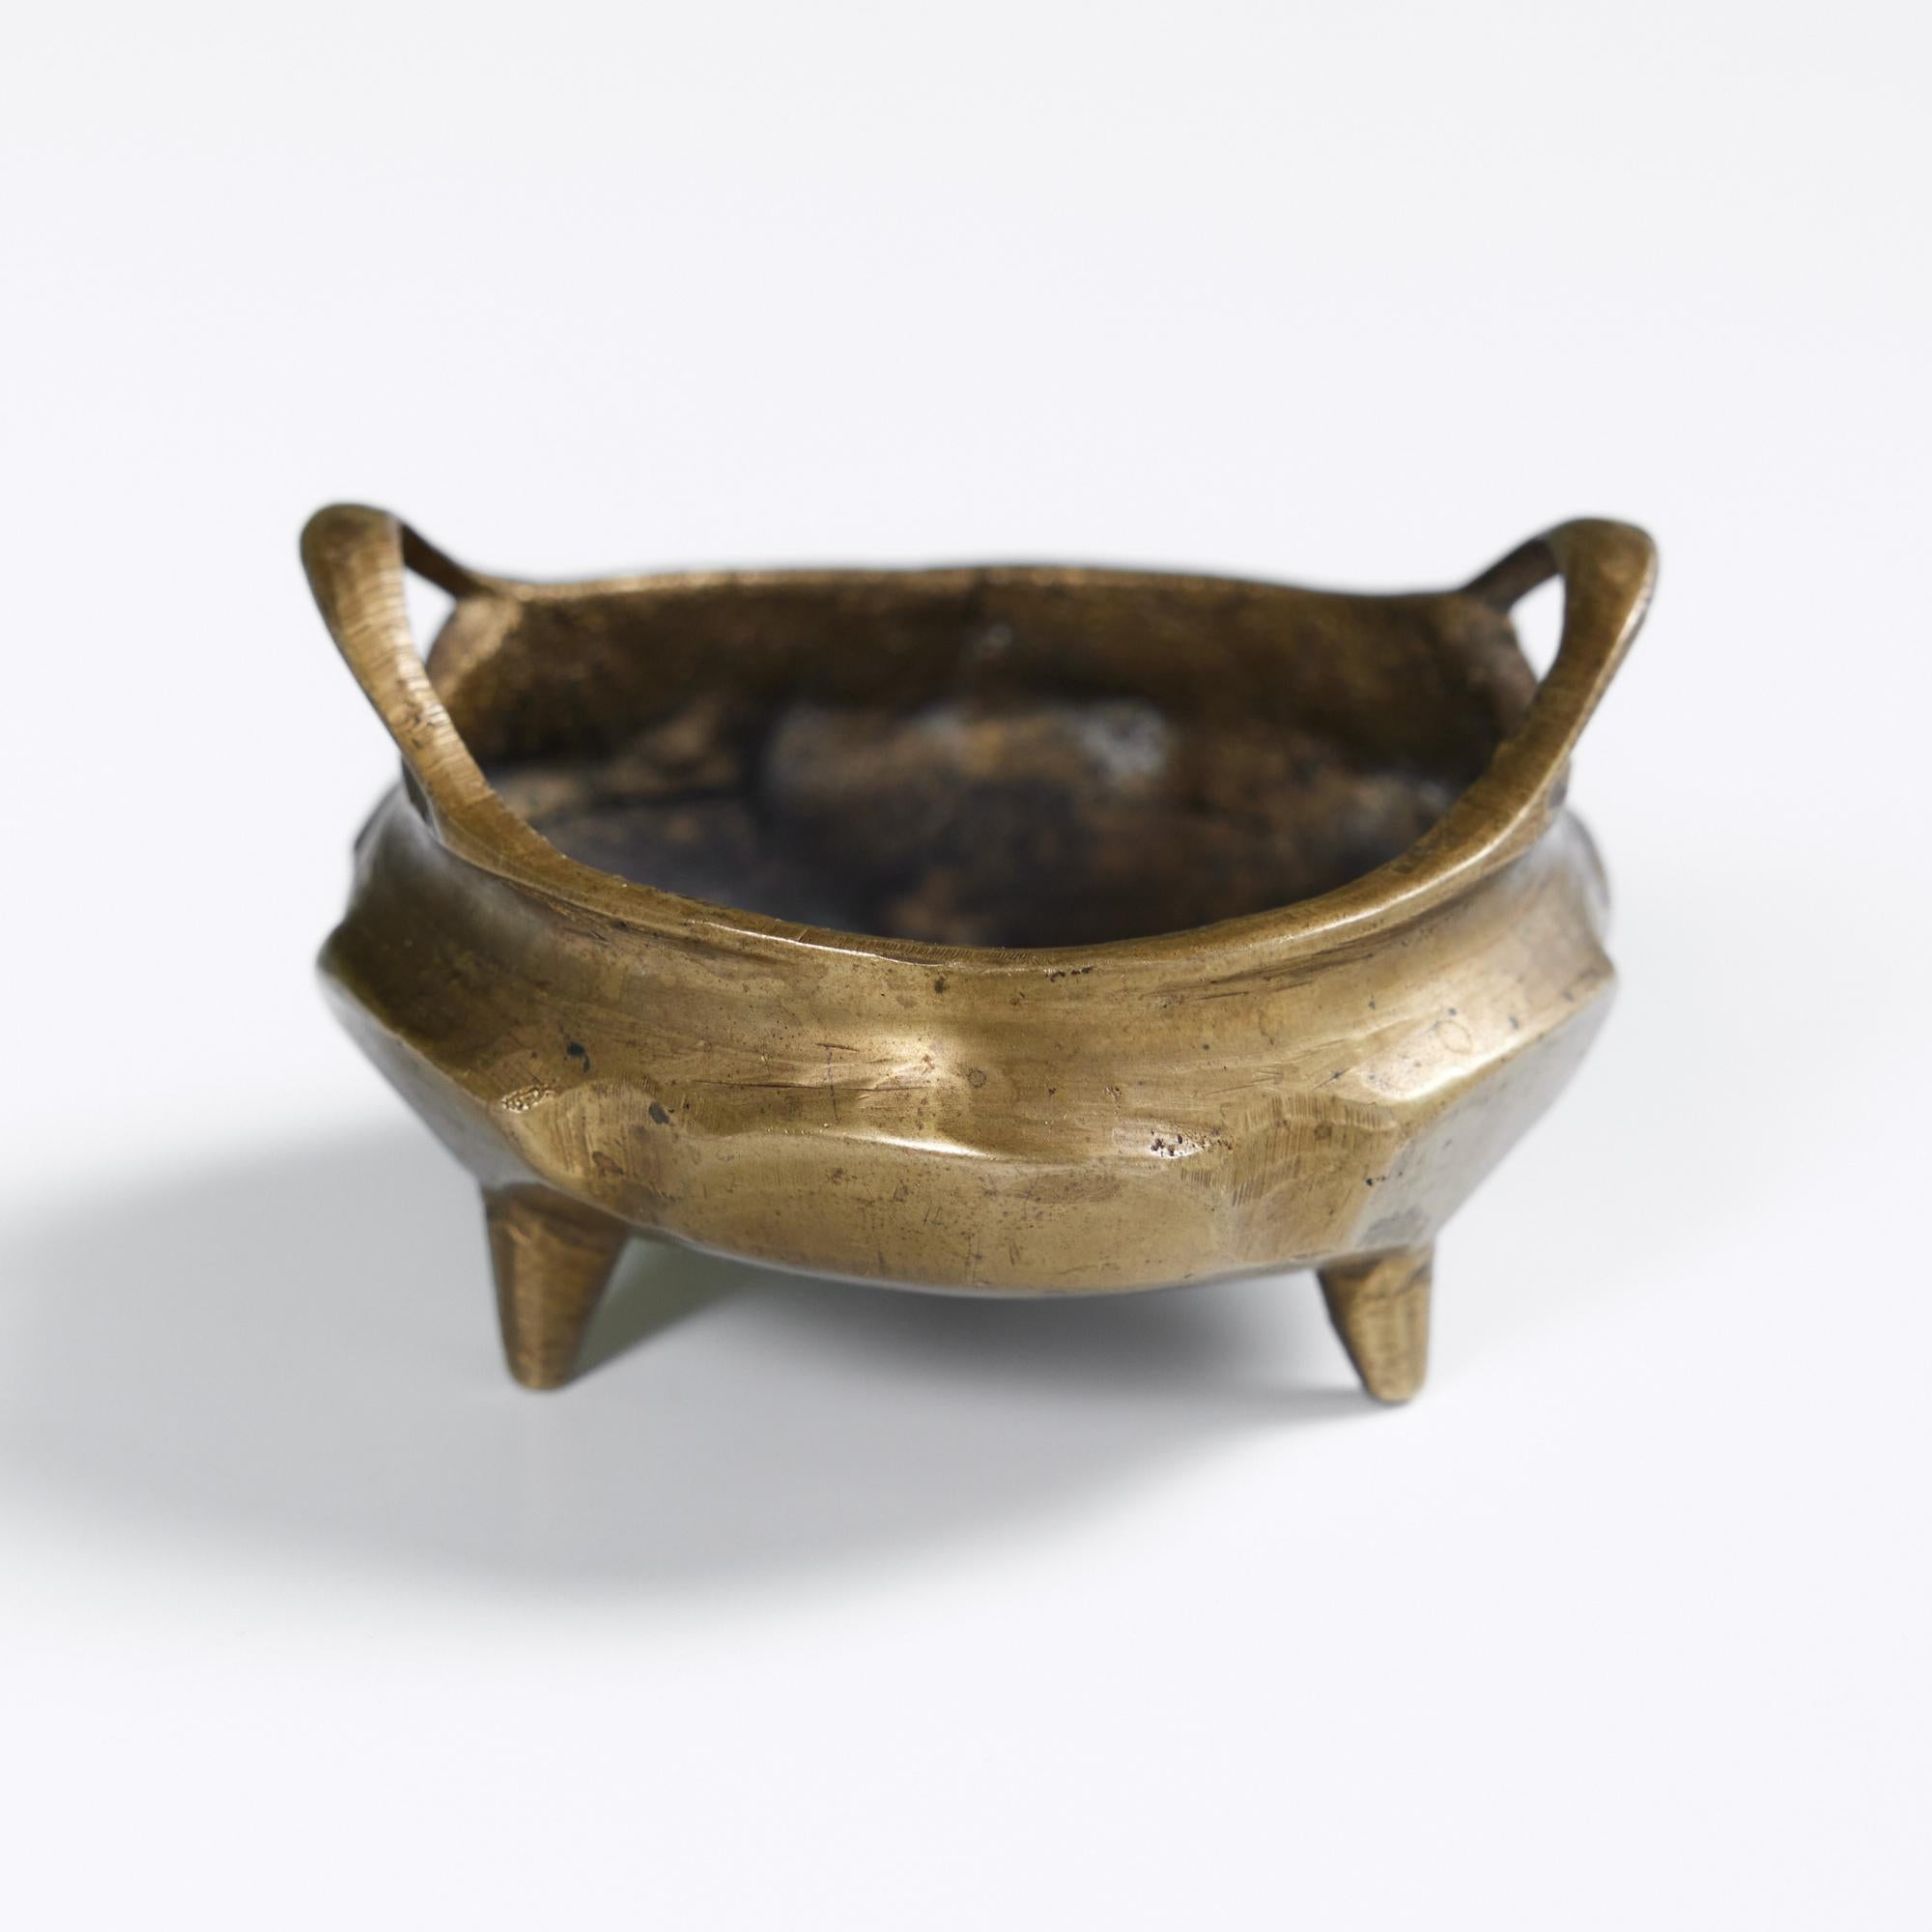 Petite brass bowl that could be used to hold a myriad of trinkets within its curved walls. The dish is finished with two rounded handles and rests on three legs. We personally love it for burning incense cones.

Dimensions
2.5